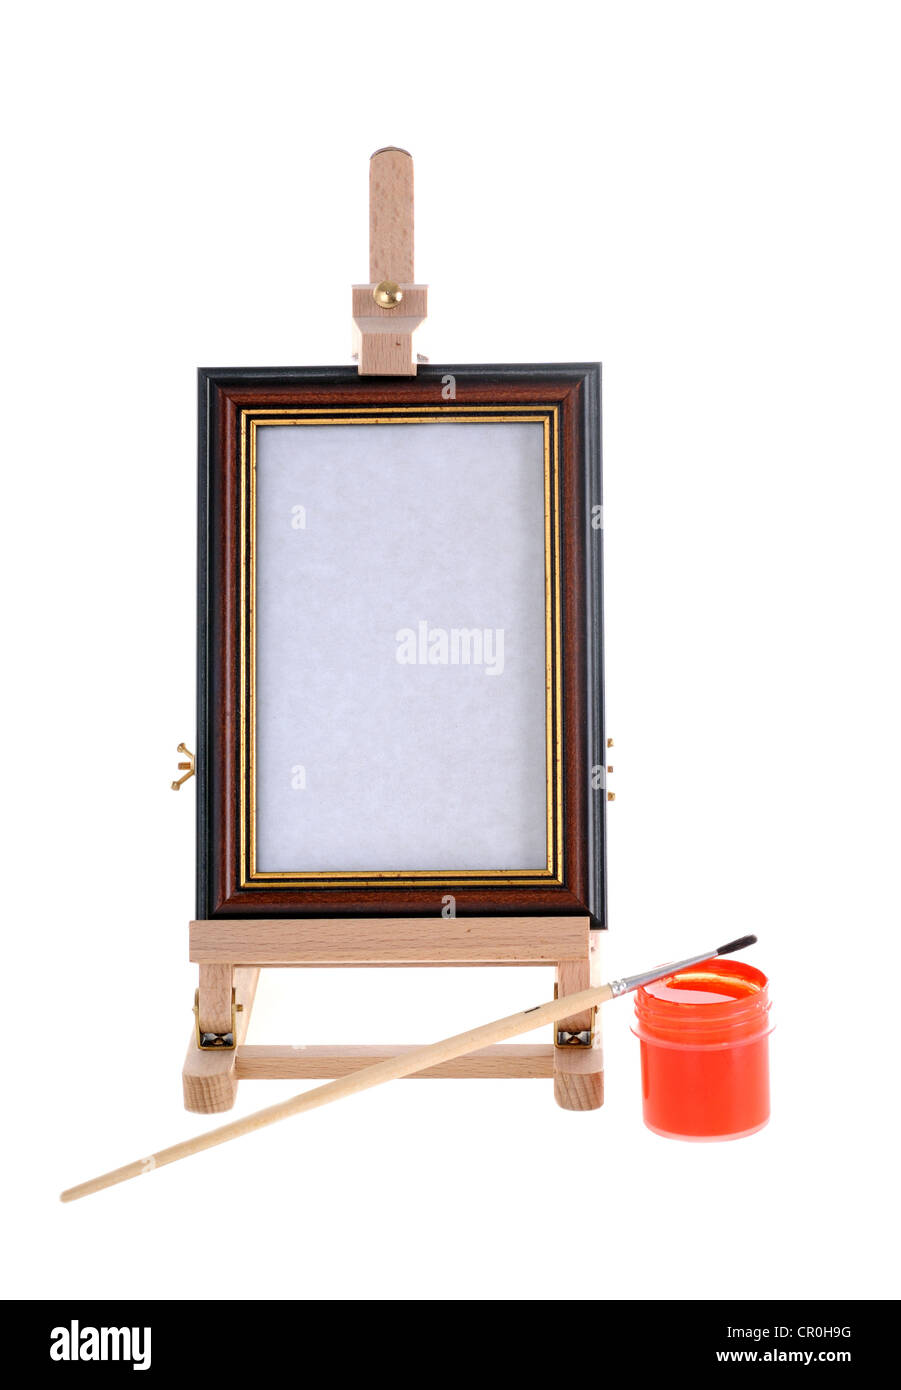 easle for painting in studio against white background Stock Photo